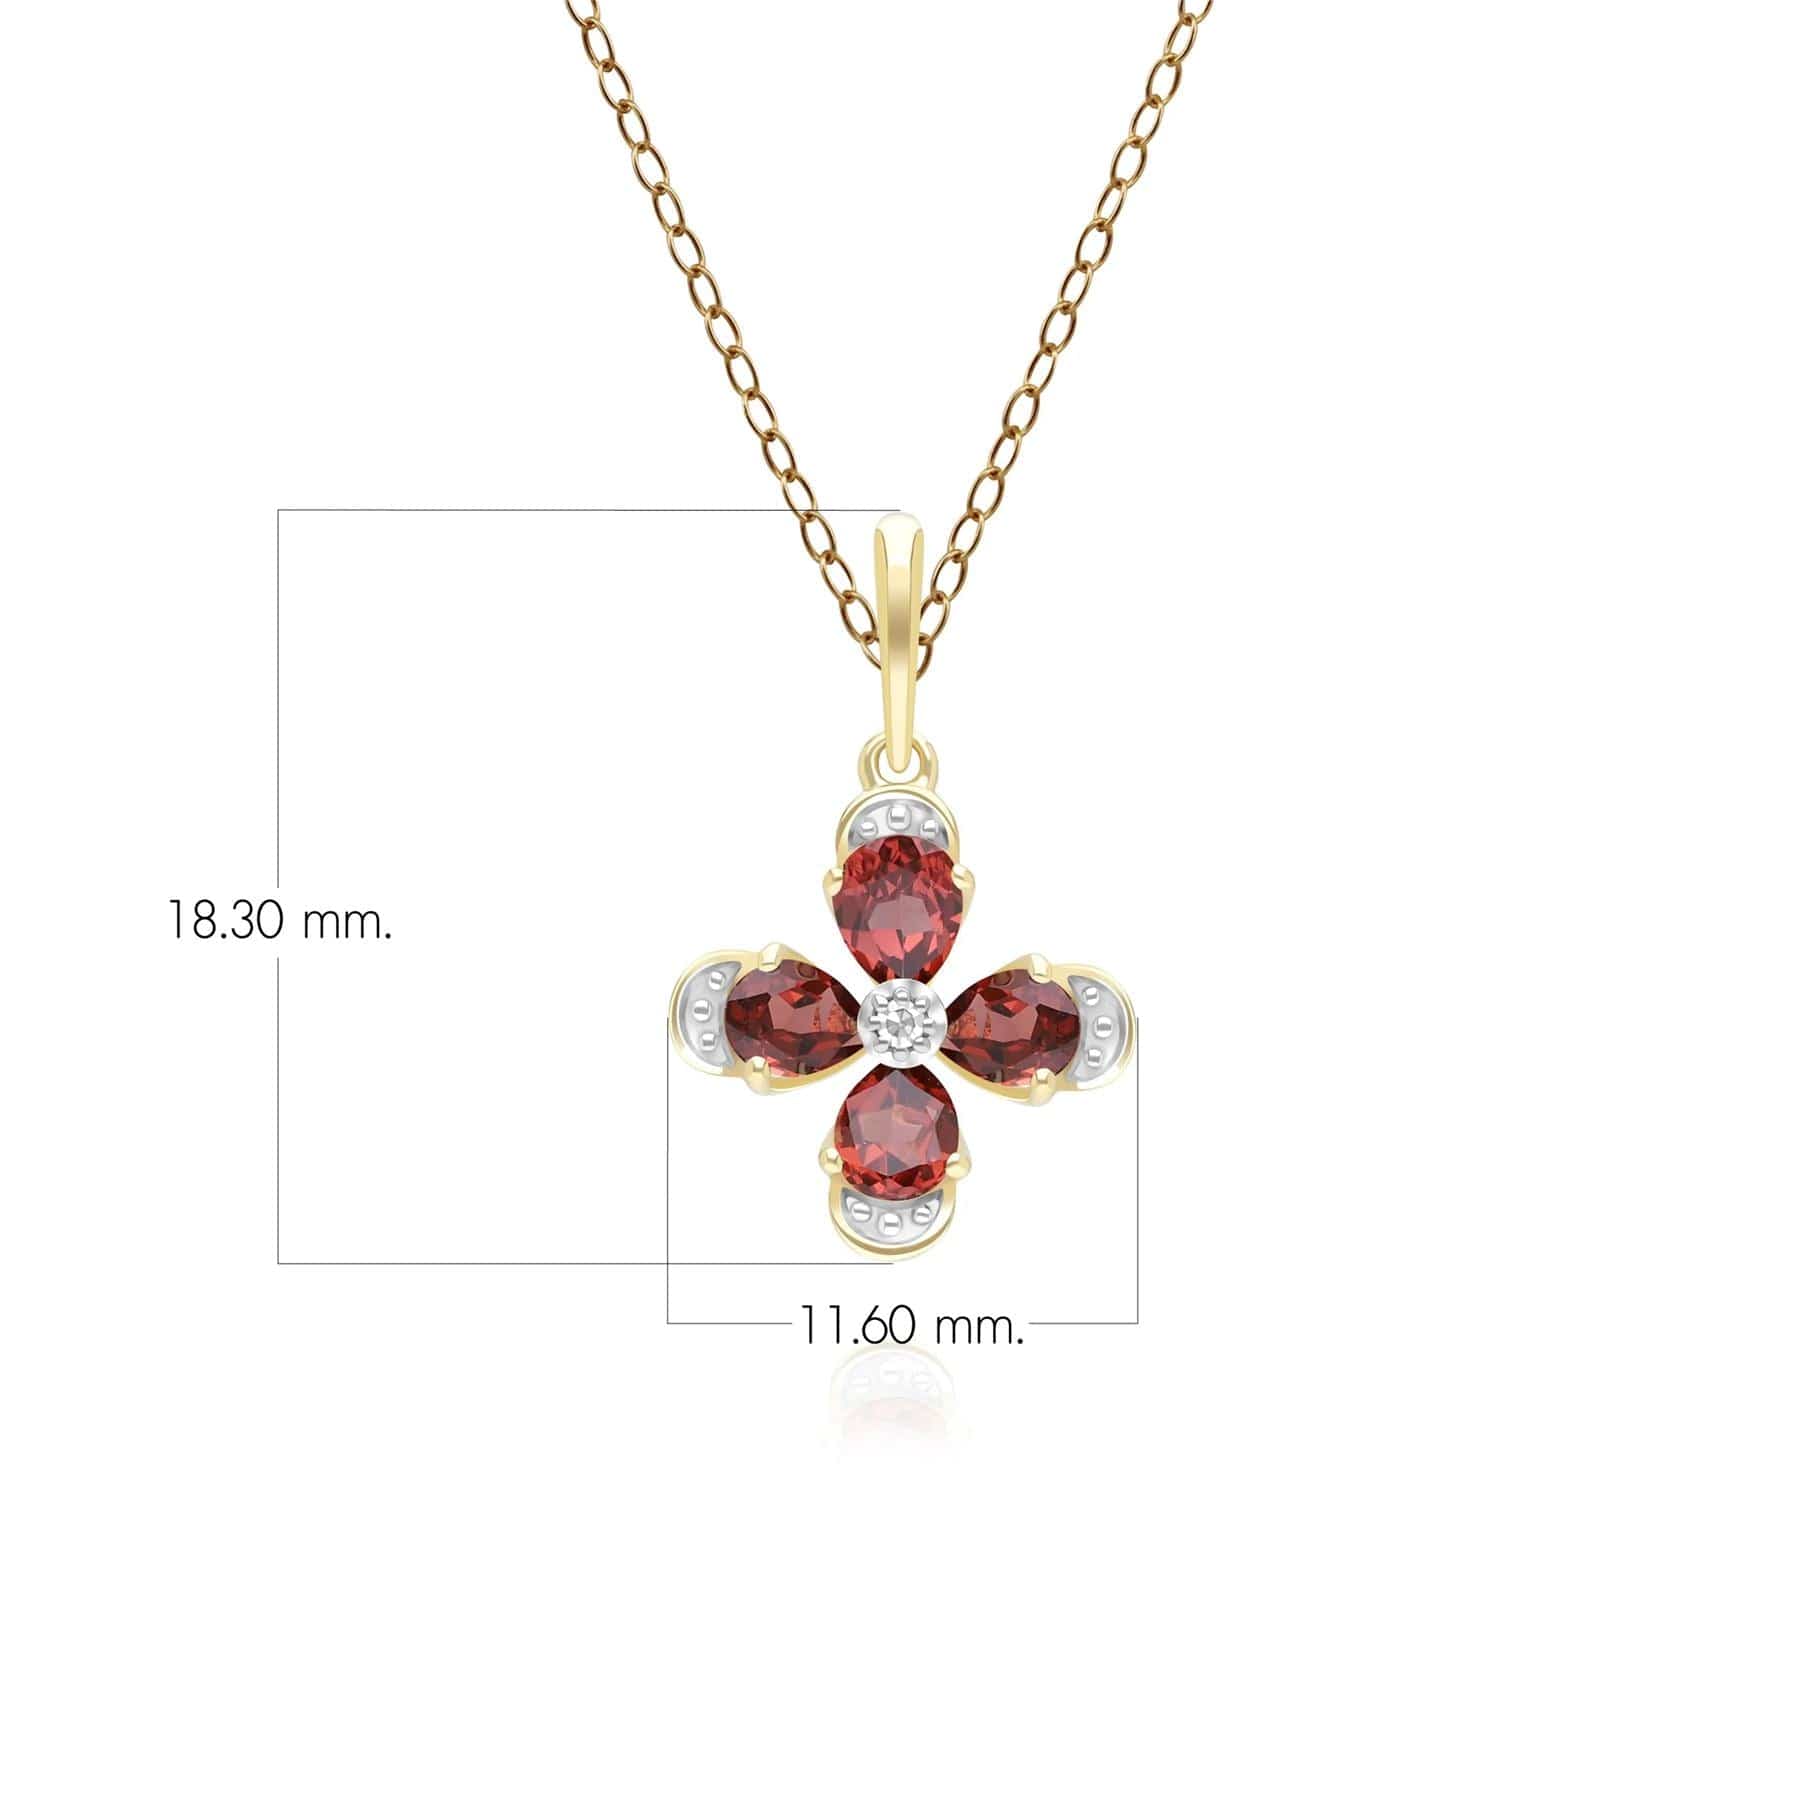 Floral Garnet & Diamond Pendant Necklace in 9ct Yellow Gold